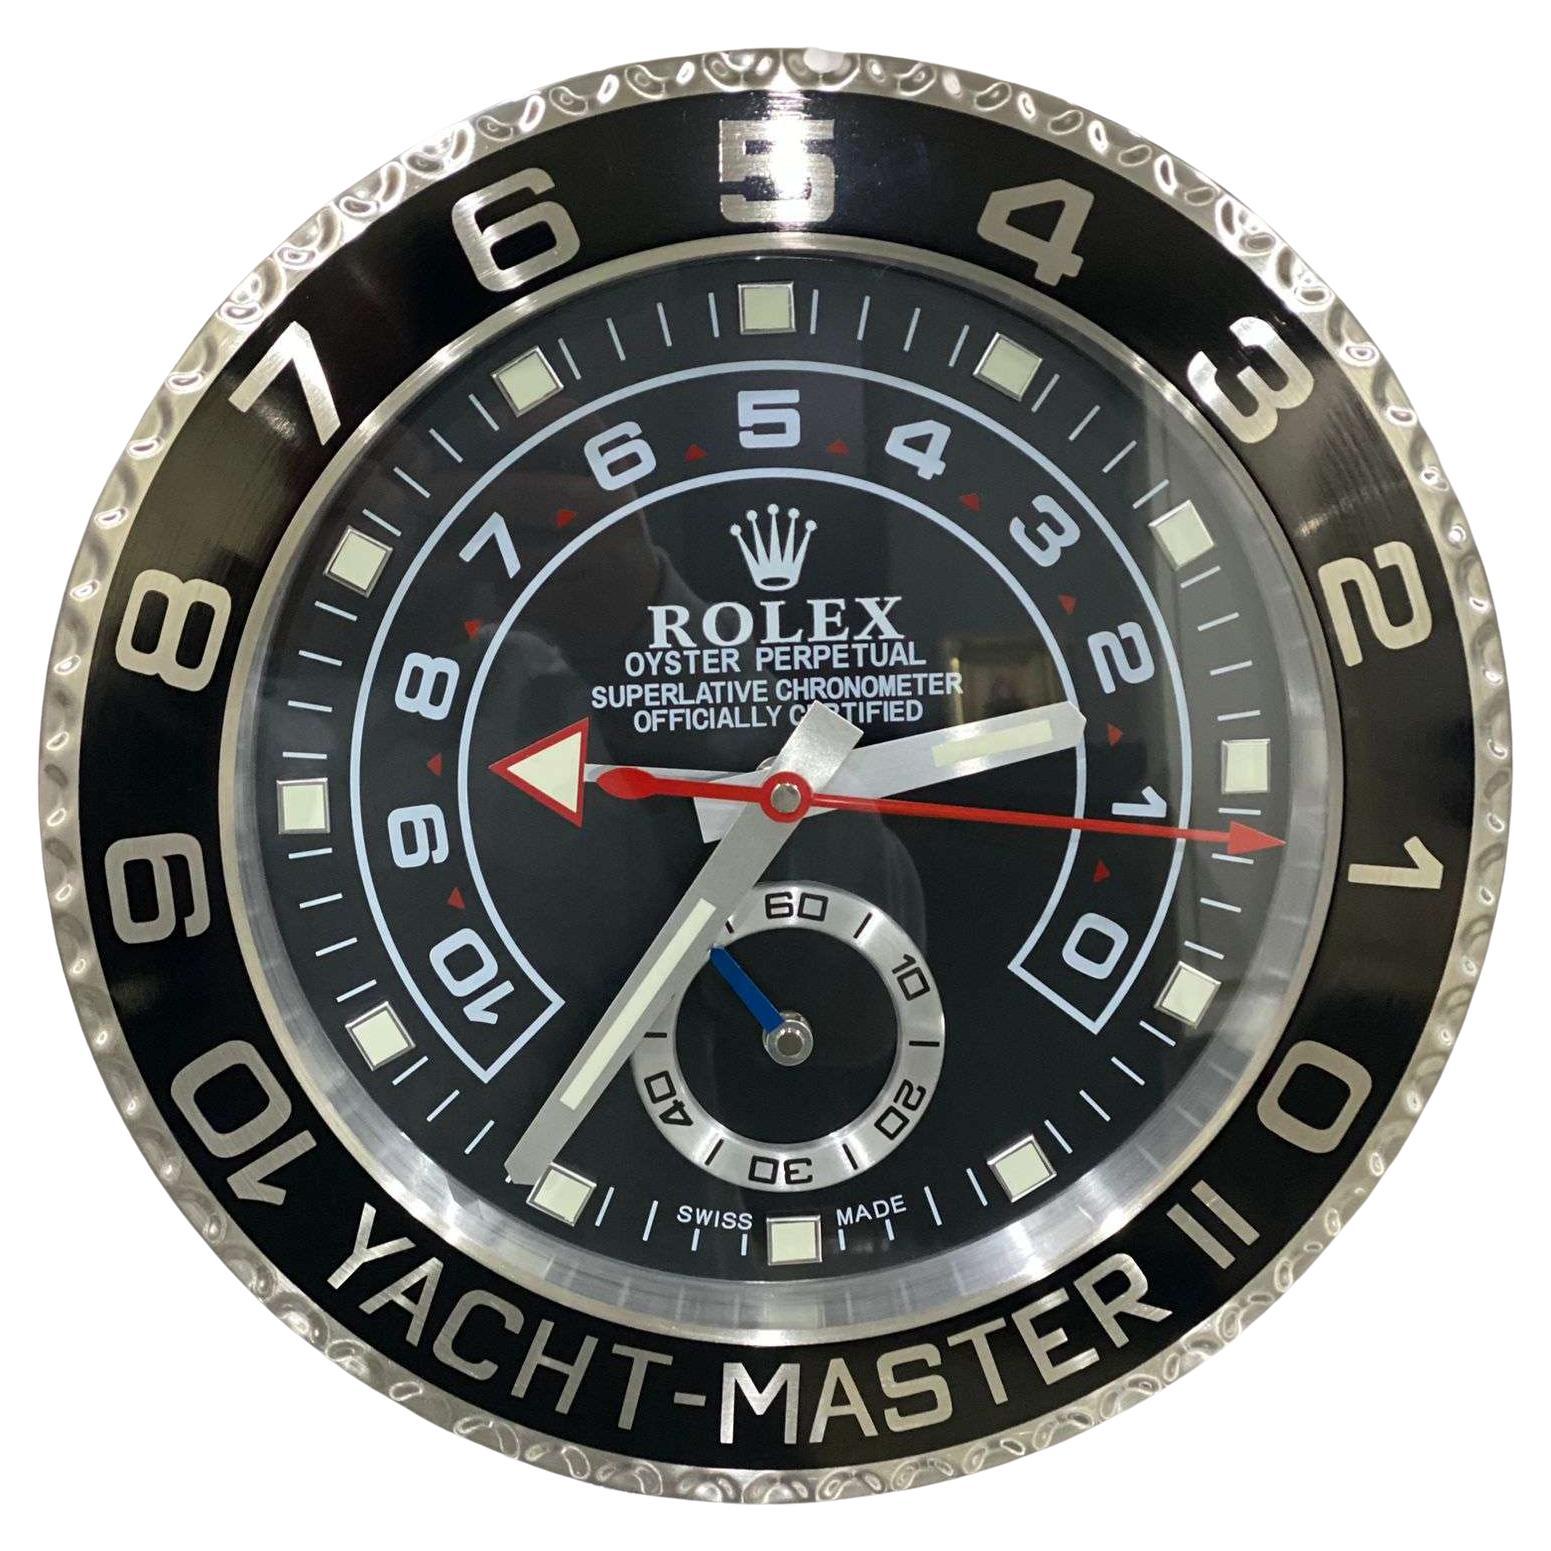 ROLEX Officially Certified Oyster Perpetual Black Yacht Master II Wall Clock 